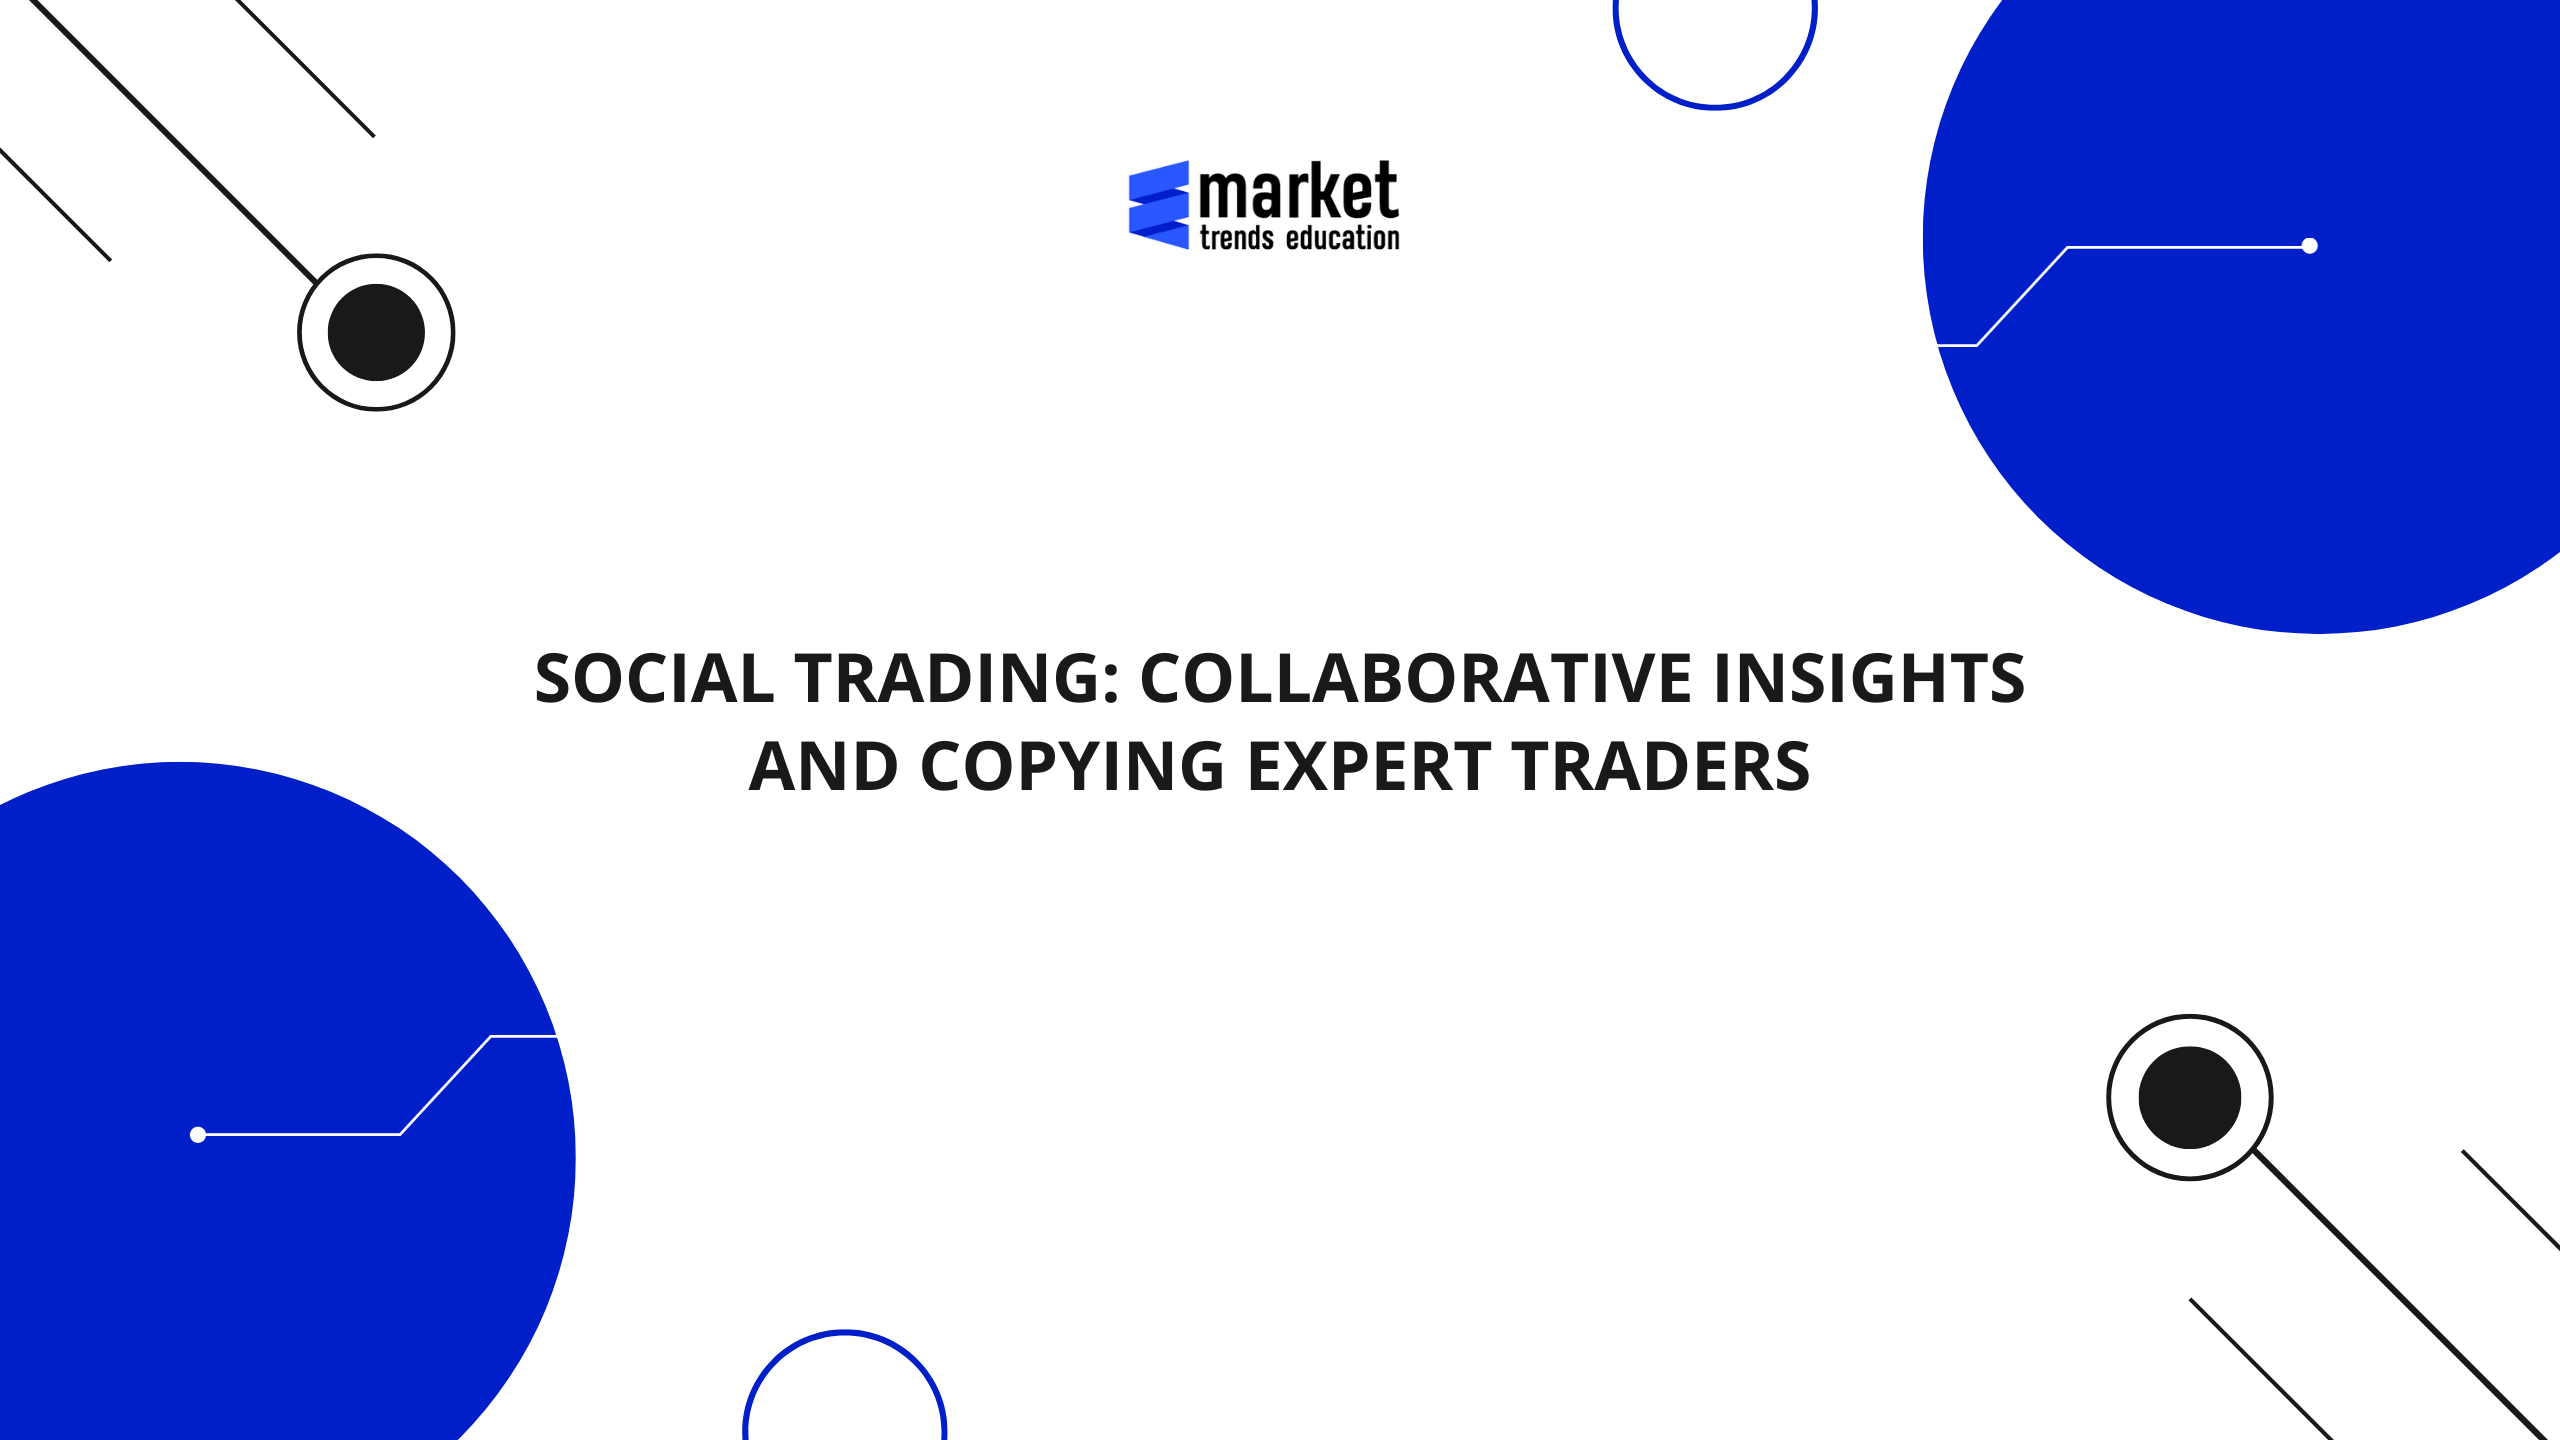 Social Trading: Collaborative Insights and Copying Expert Traders